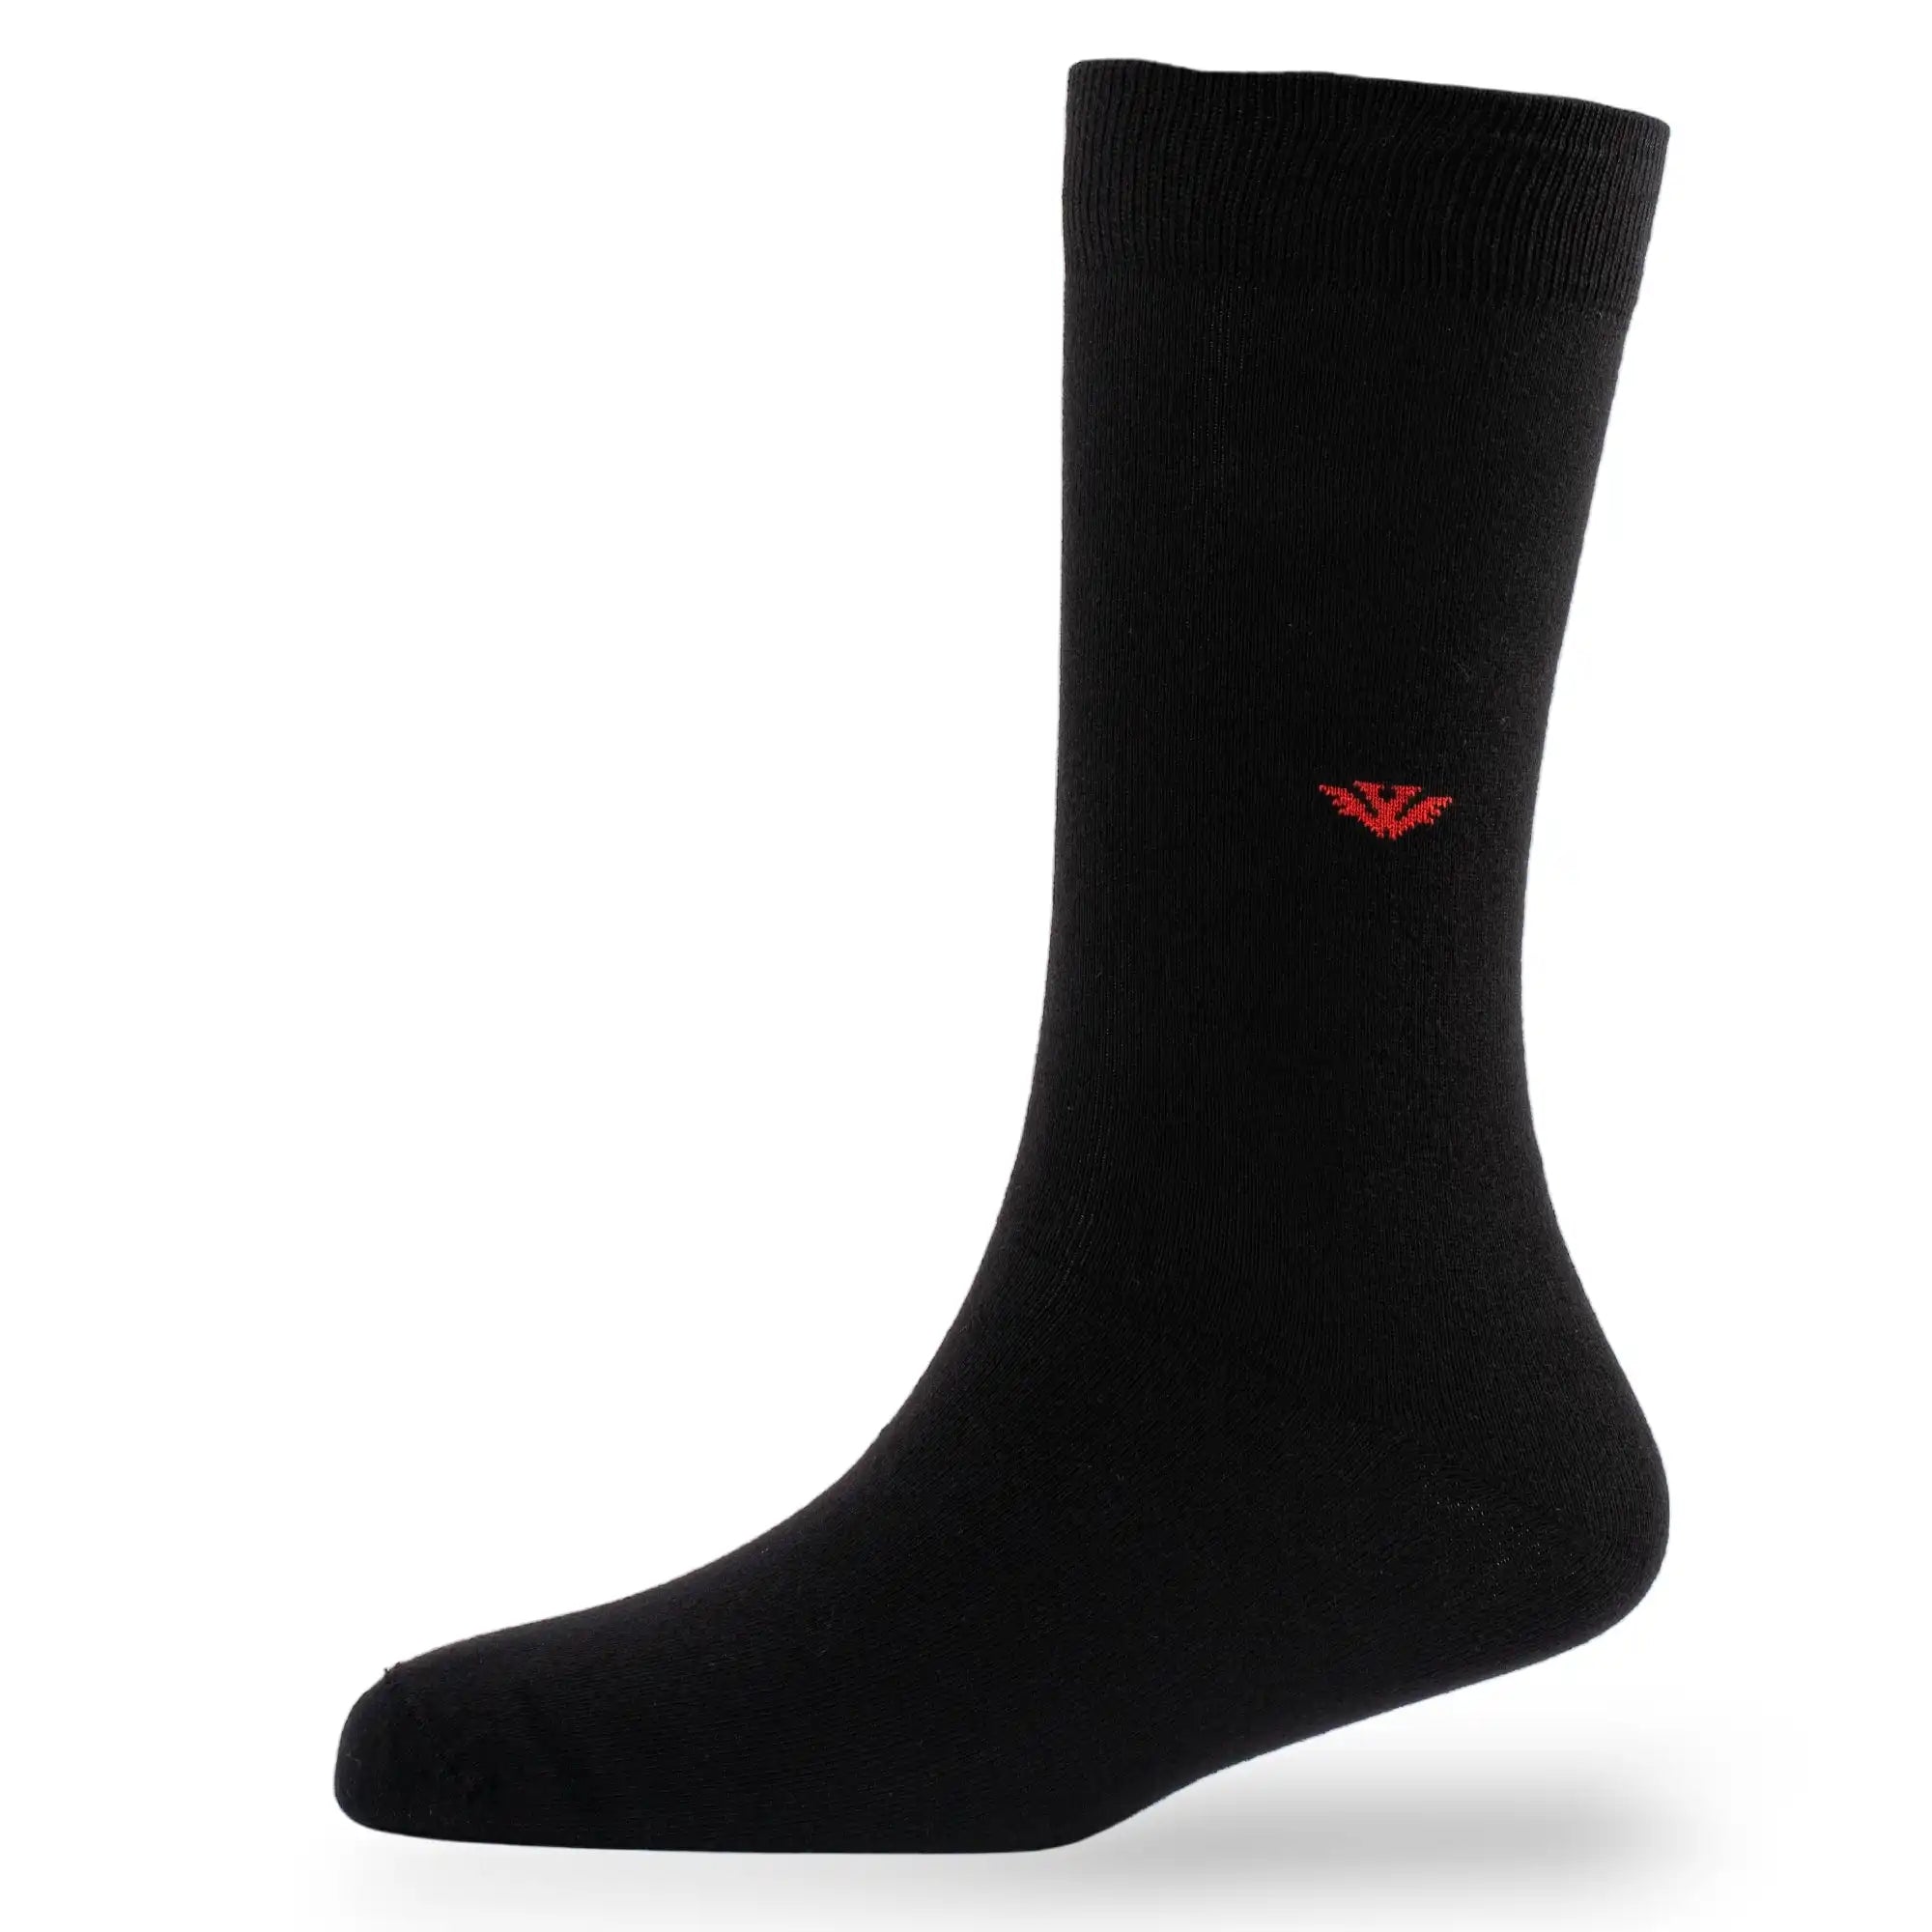 Young Wings Men's Black Colour Cotton Fabric Solid Full Length Socks - Pack of 5, Style no. 3400-M1